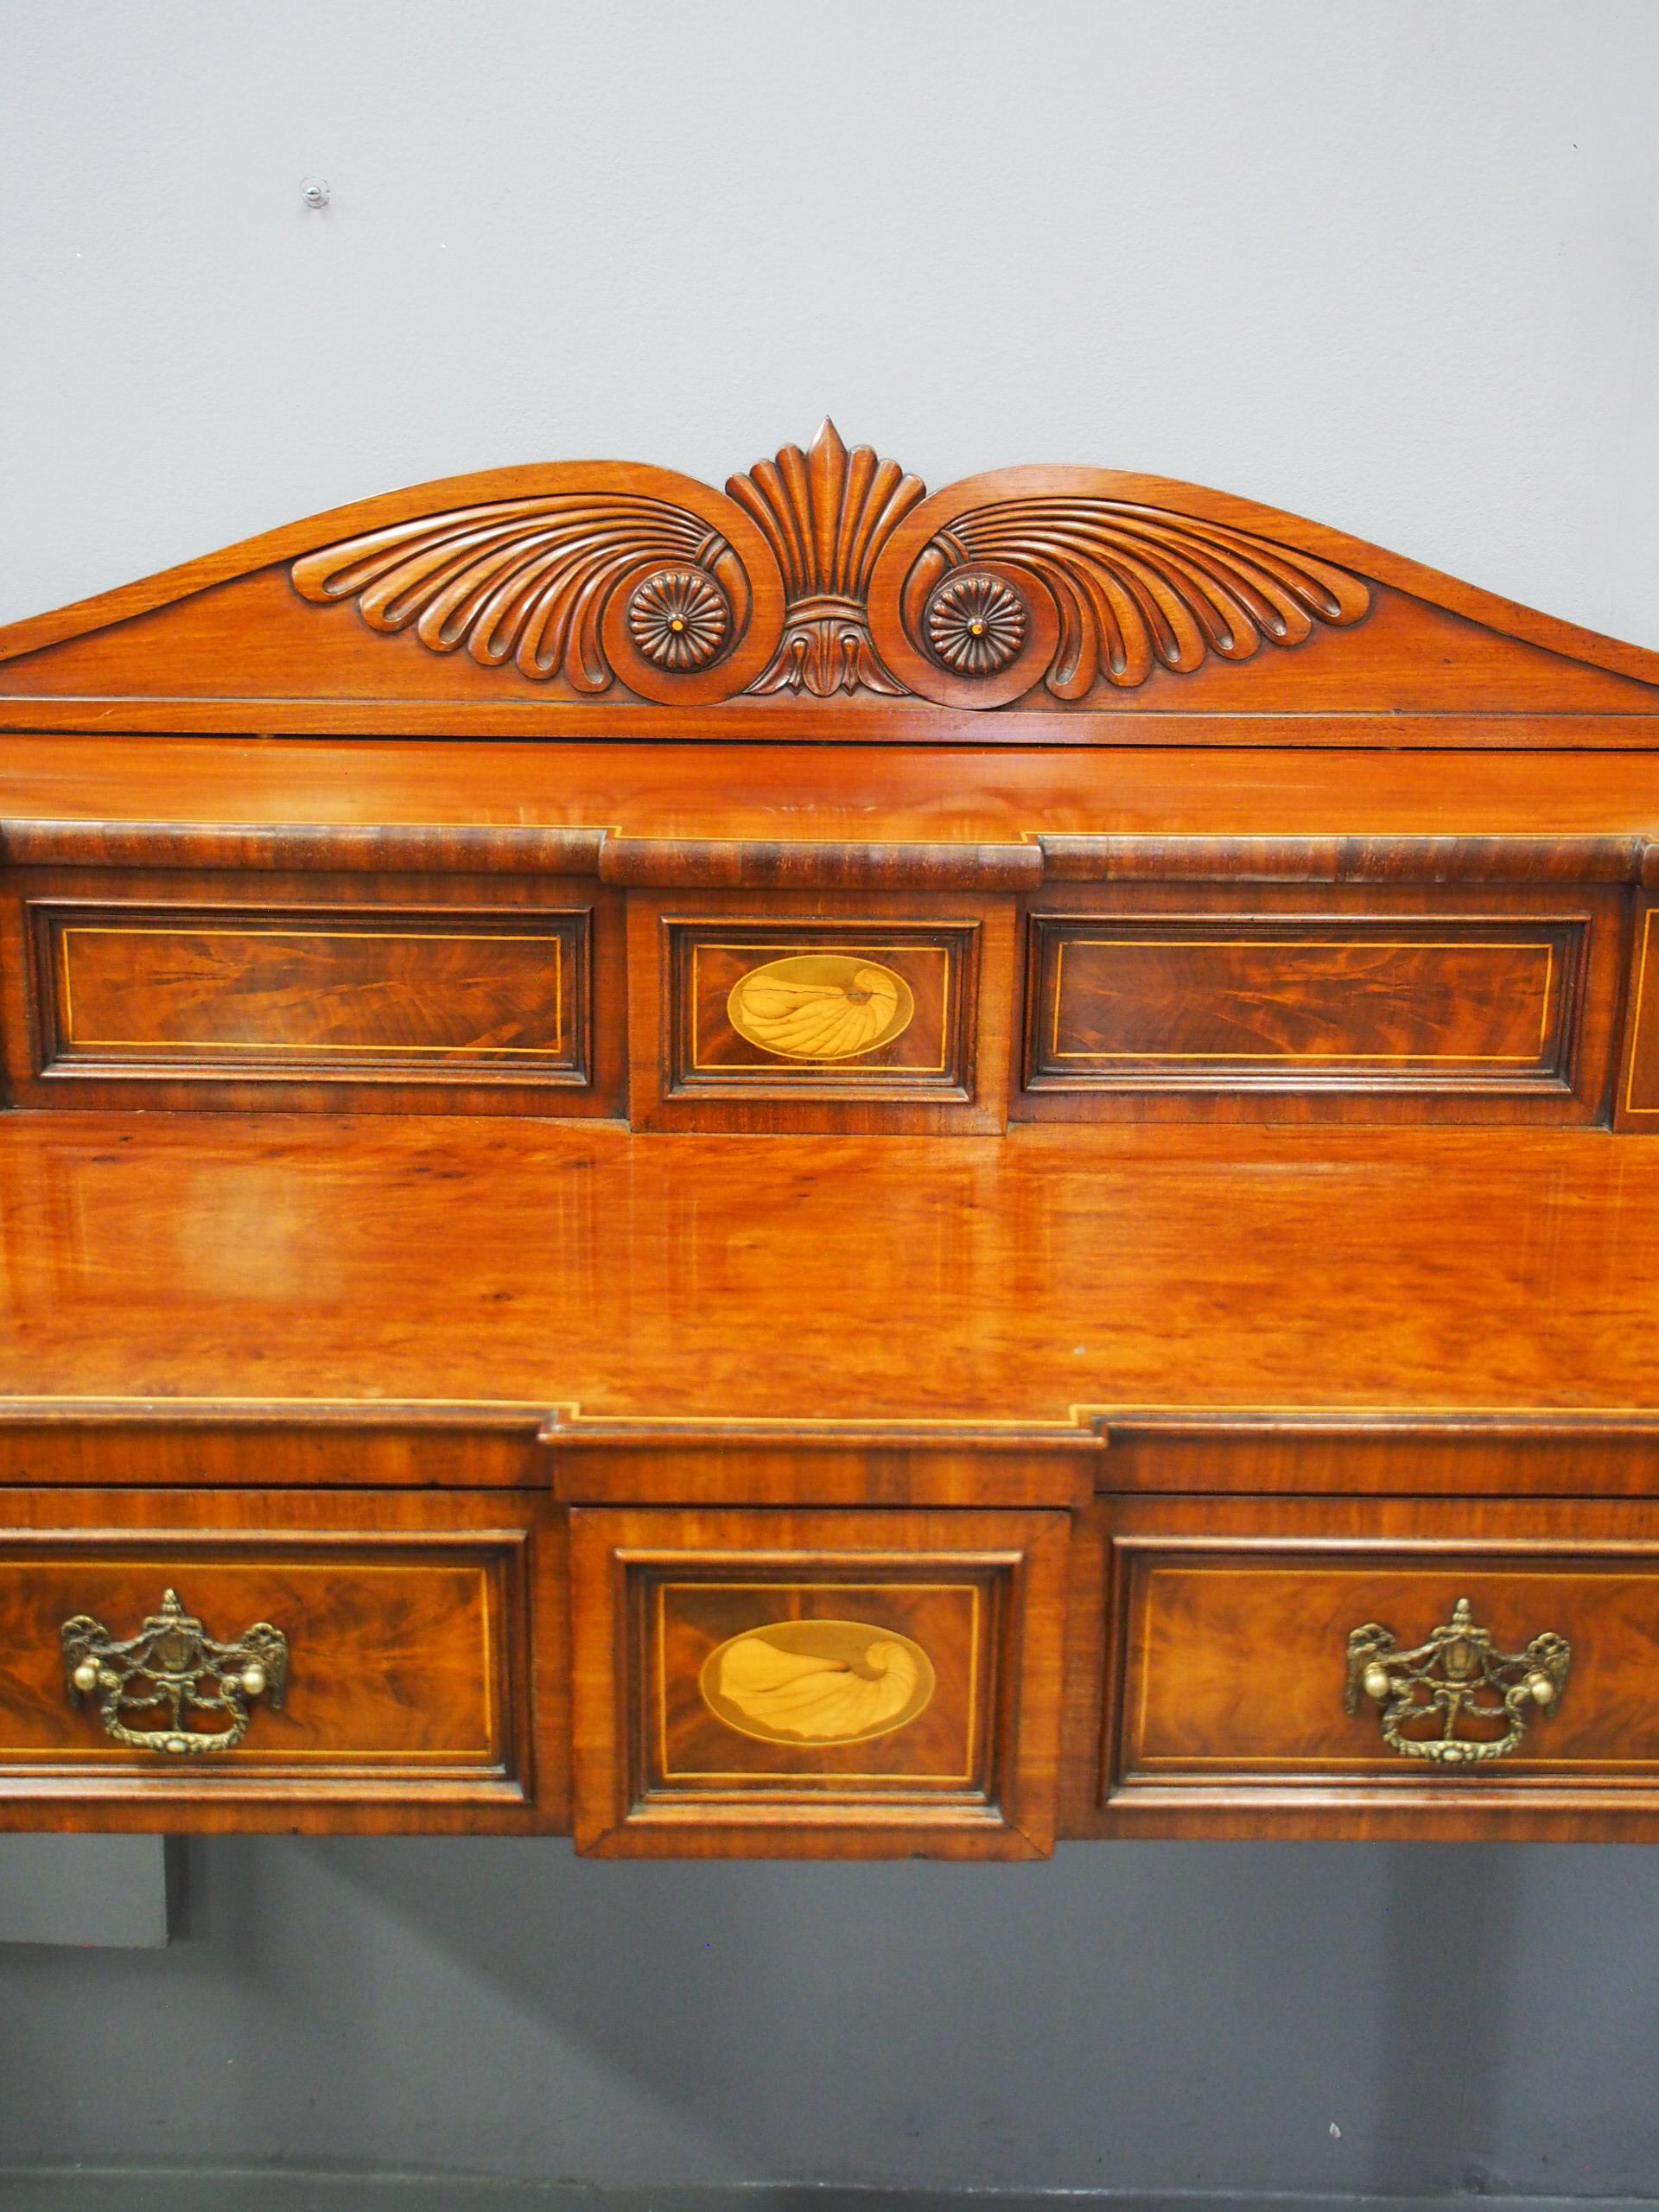 George III inlaid Scottish mahogany sideboard, circa 1800. The stage back with boxwood stringing and shell and urn inlaid panels with sliding doors surmounted by a shaped, acanthus-carved back. The breakfront top in plum pudding mahogany is above